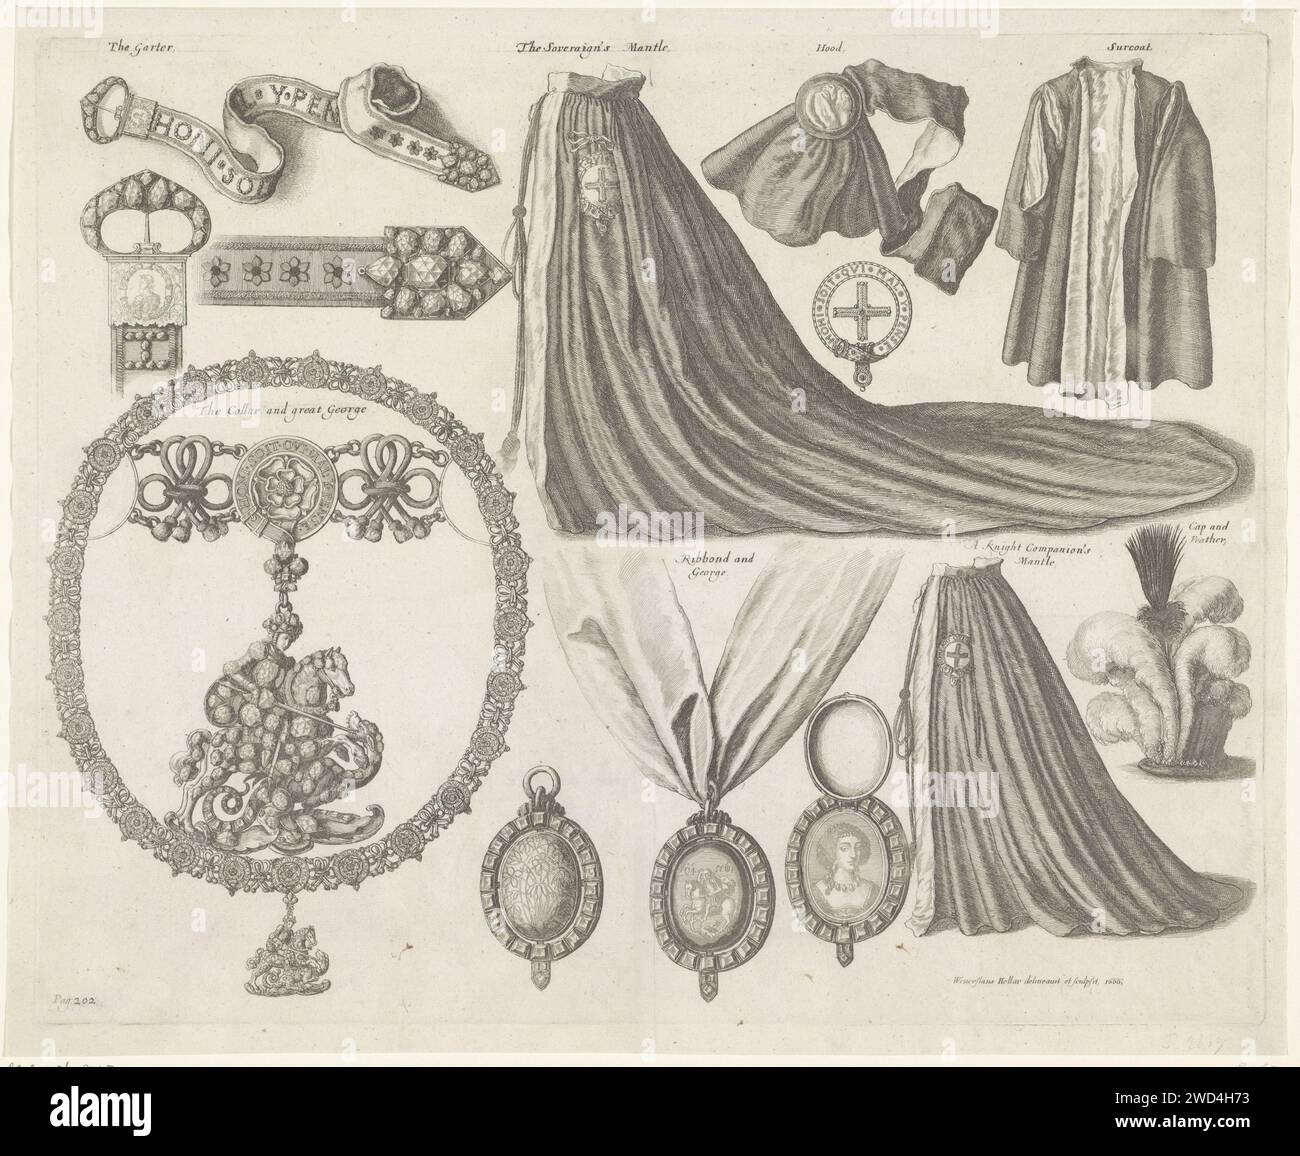 Insignes of the Order of the Garter, Wenceslaus Hollar, 1666 print Print at the bottom left mark: page: 202. London paper etching knighthood order (GARTER). clothing ( knighting ceremony) Stock Photo